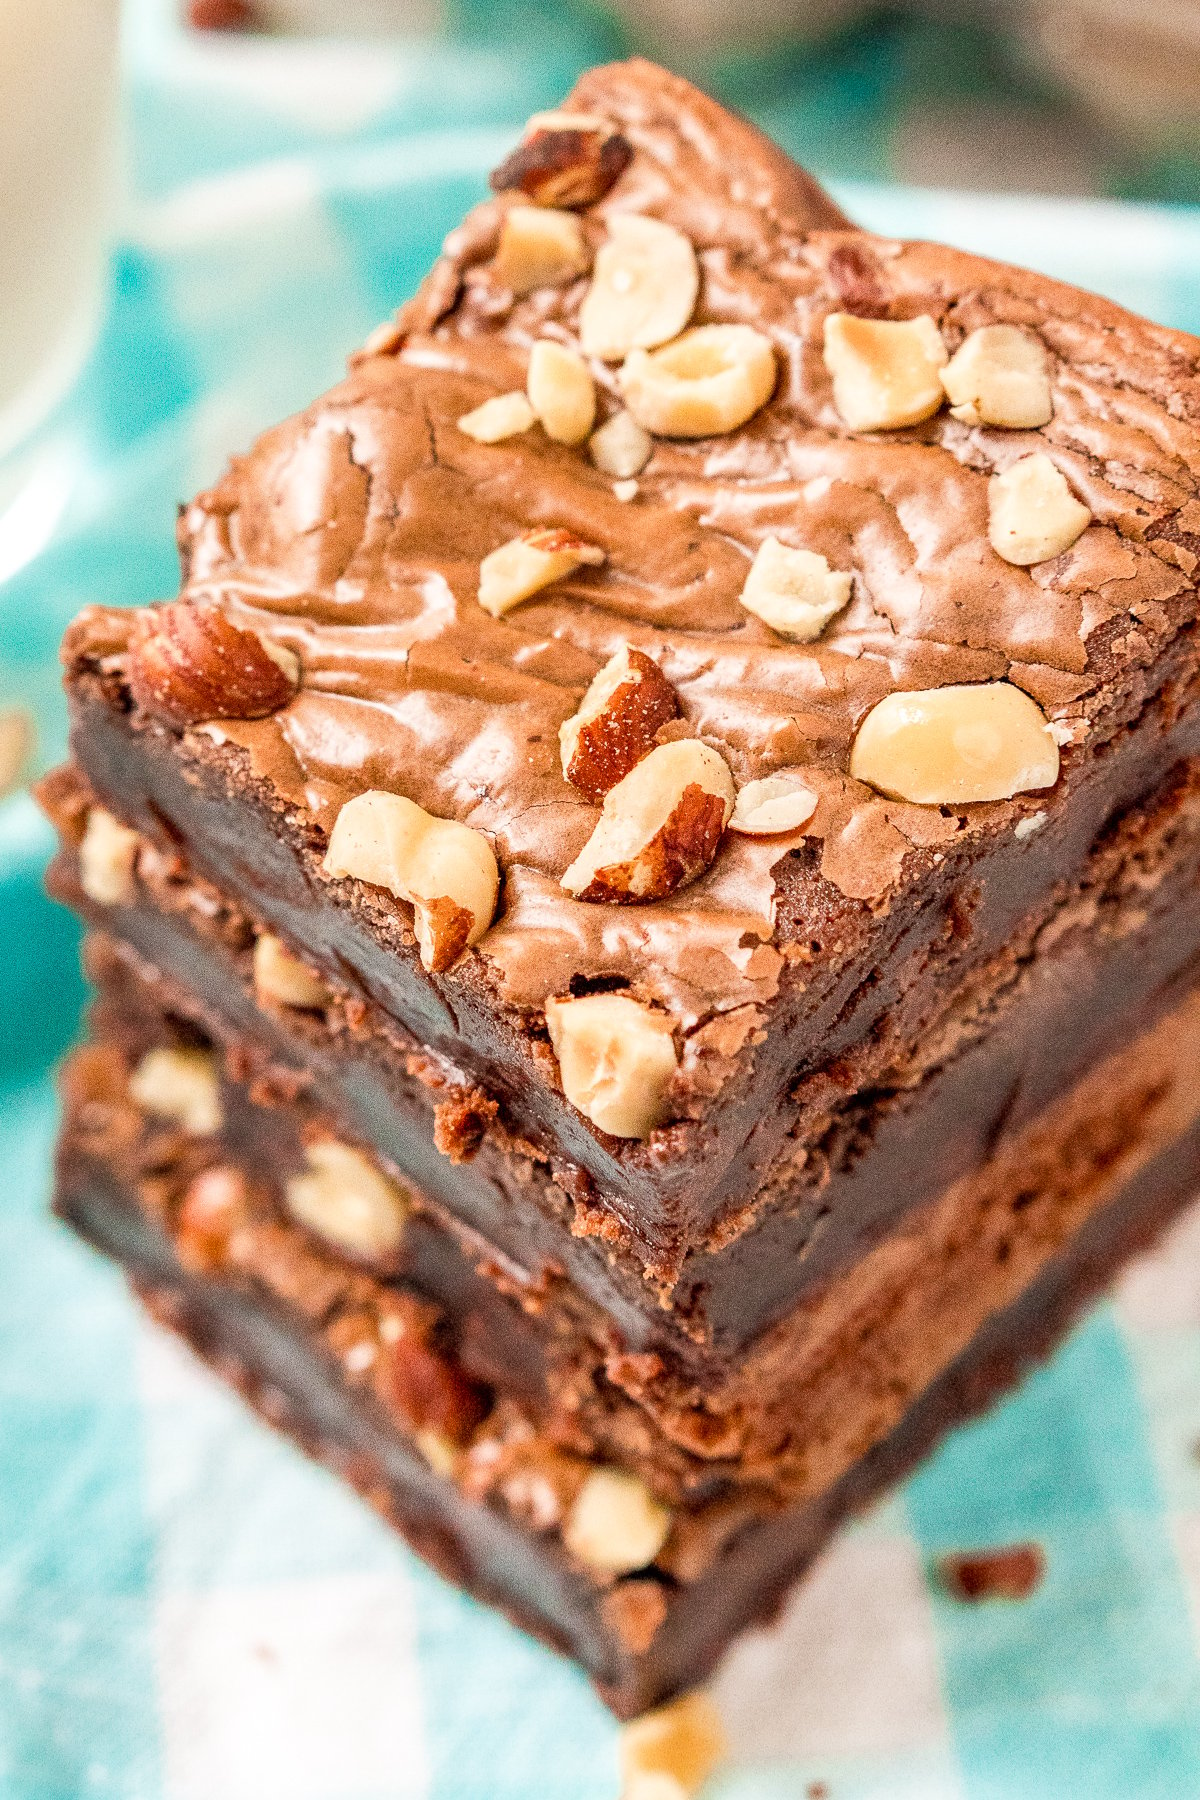 Overhead angled photo of a stack of hazelnut brownies with hazelnuts on top on a blue and white napkin.